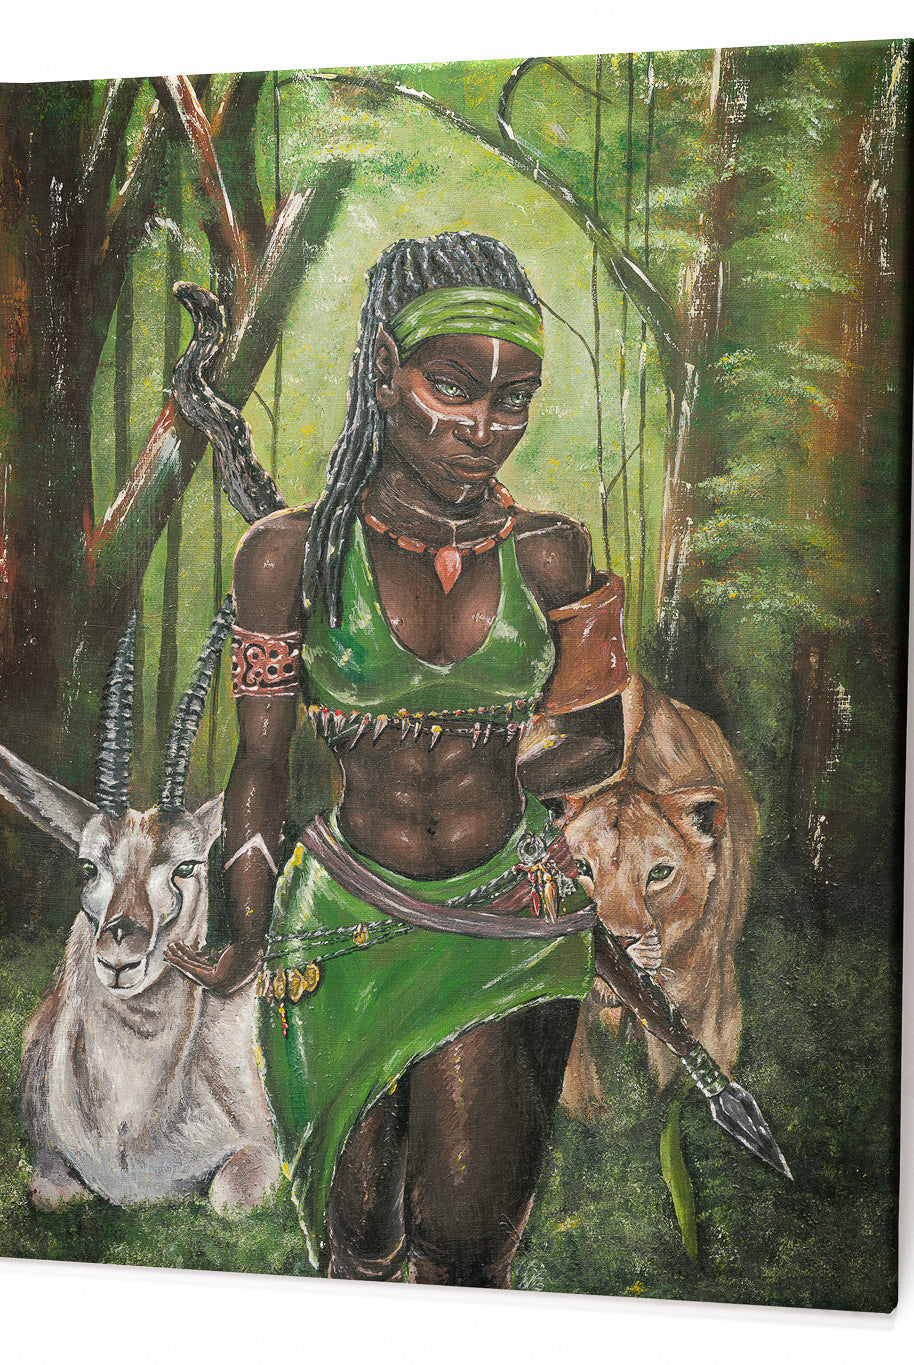 Ajá Canvas Print on a durable, high-gloss canvas, depicting Yoruba Orisa who is the soul of the forest and the animals within it.